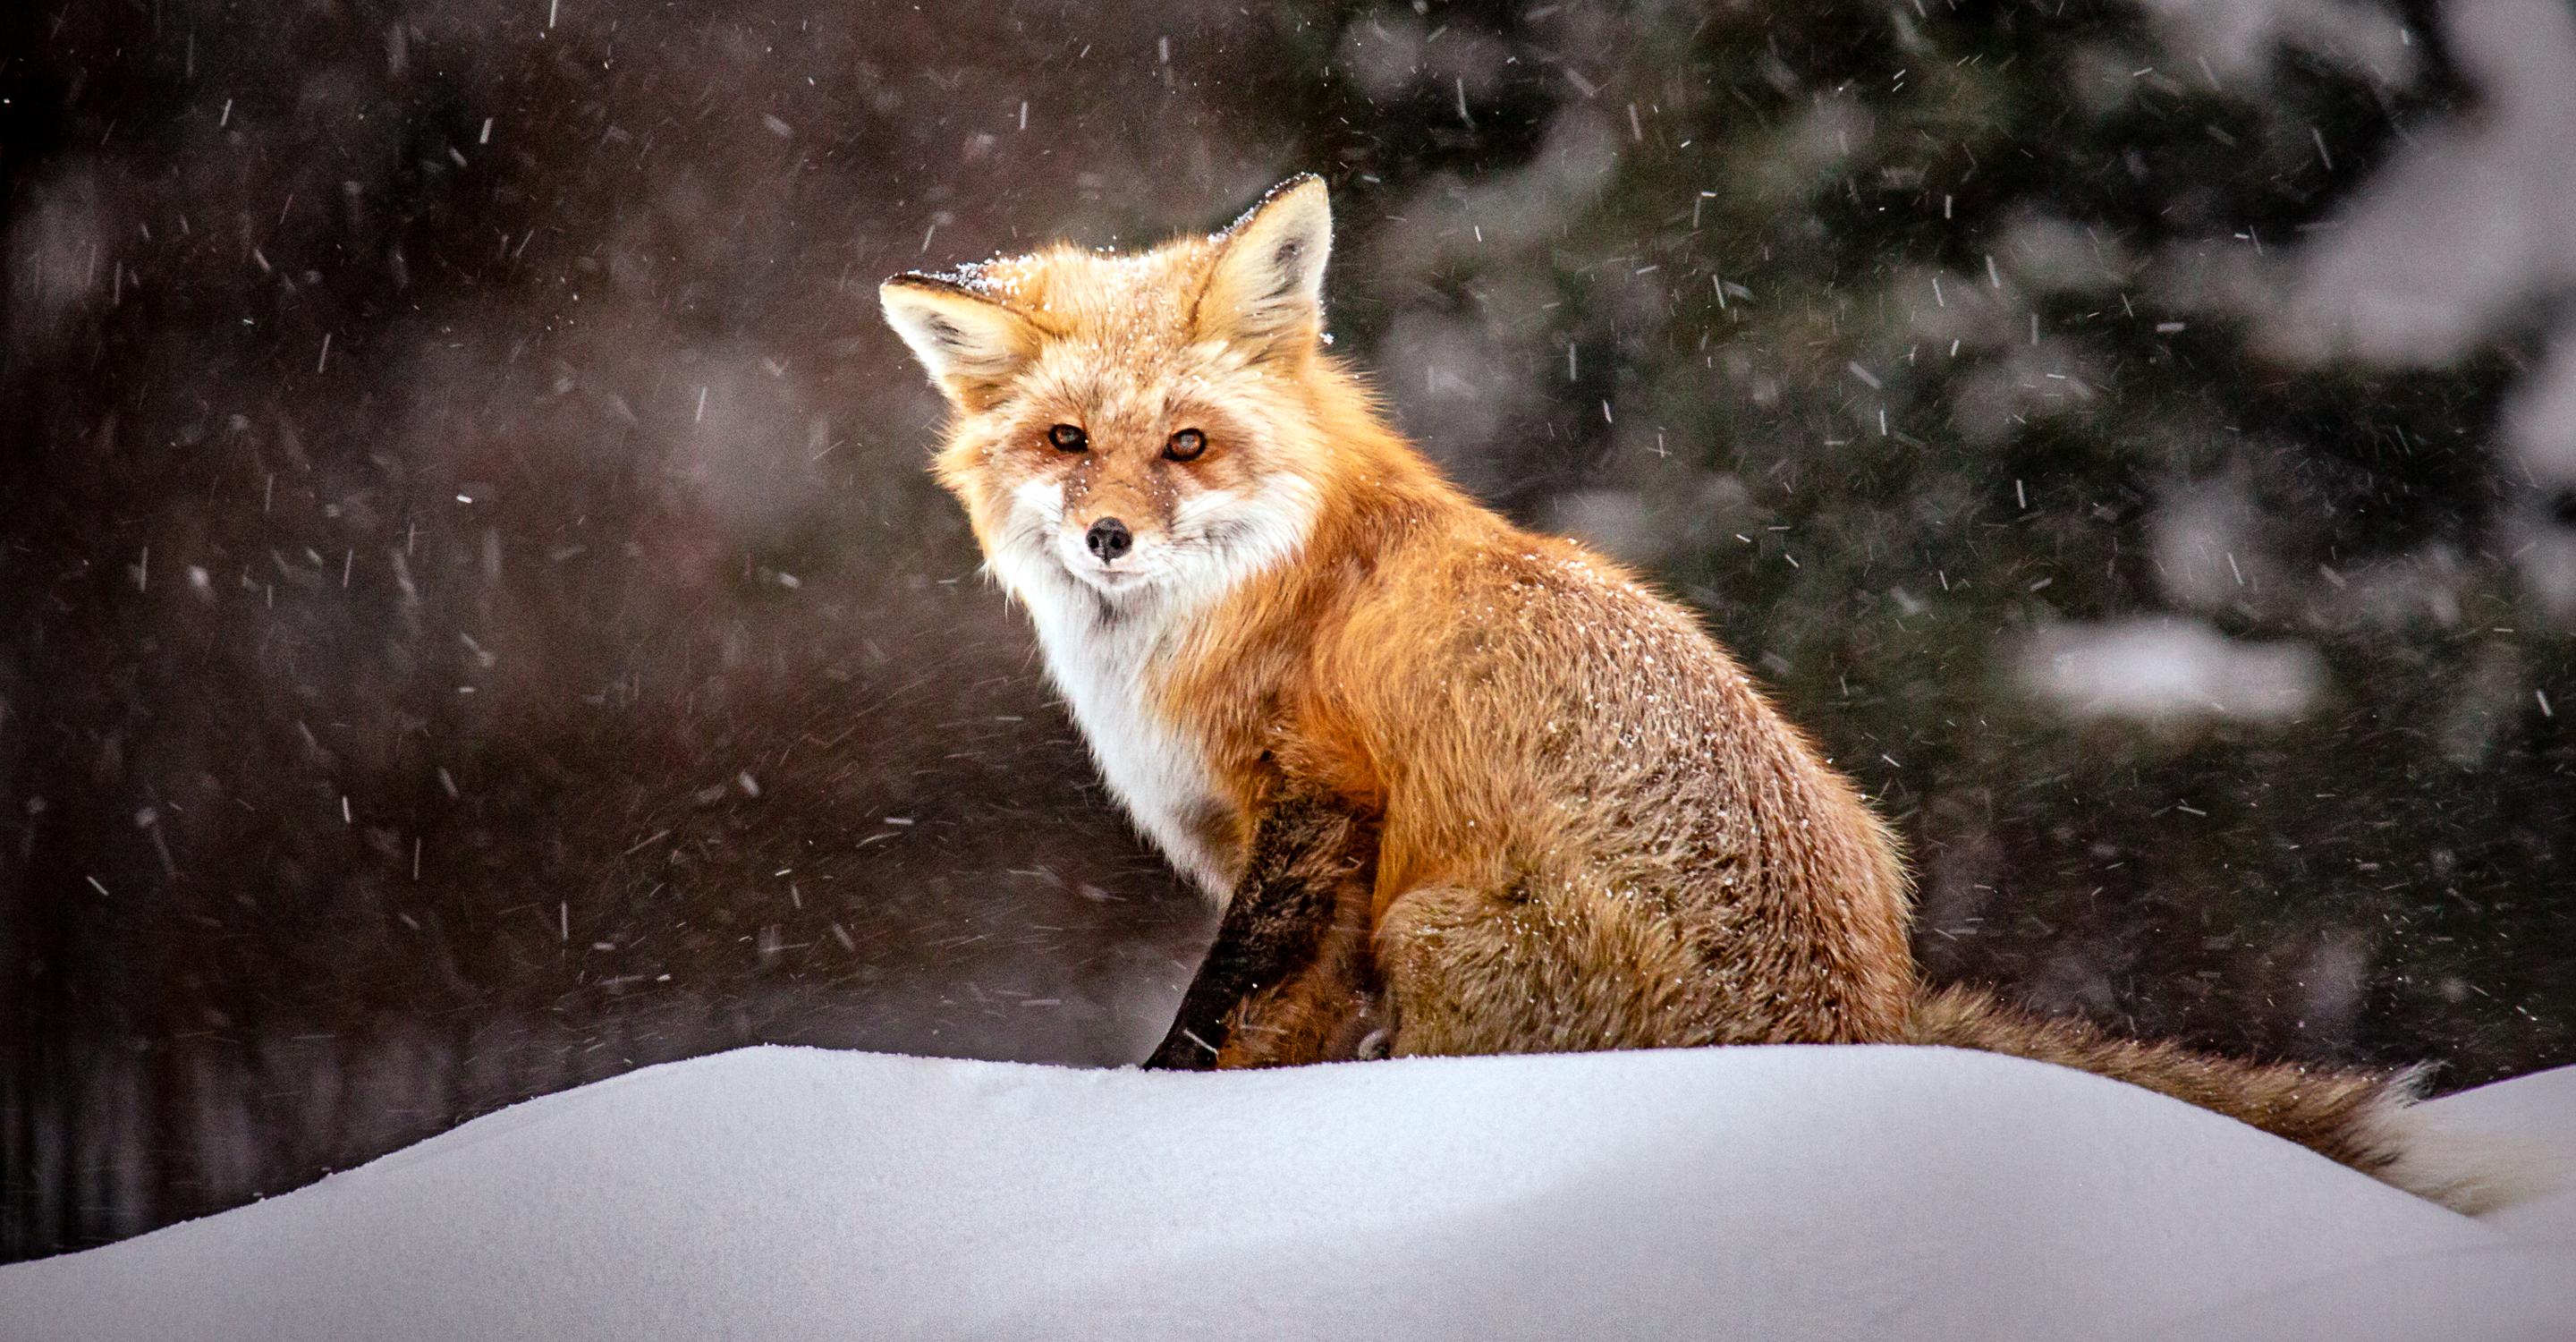 A red fox looks at the camera during a snowfall in Yellowstone National Park, United States